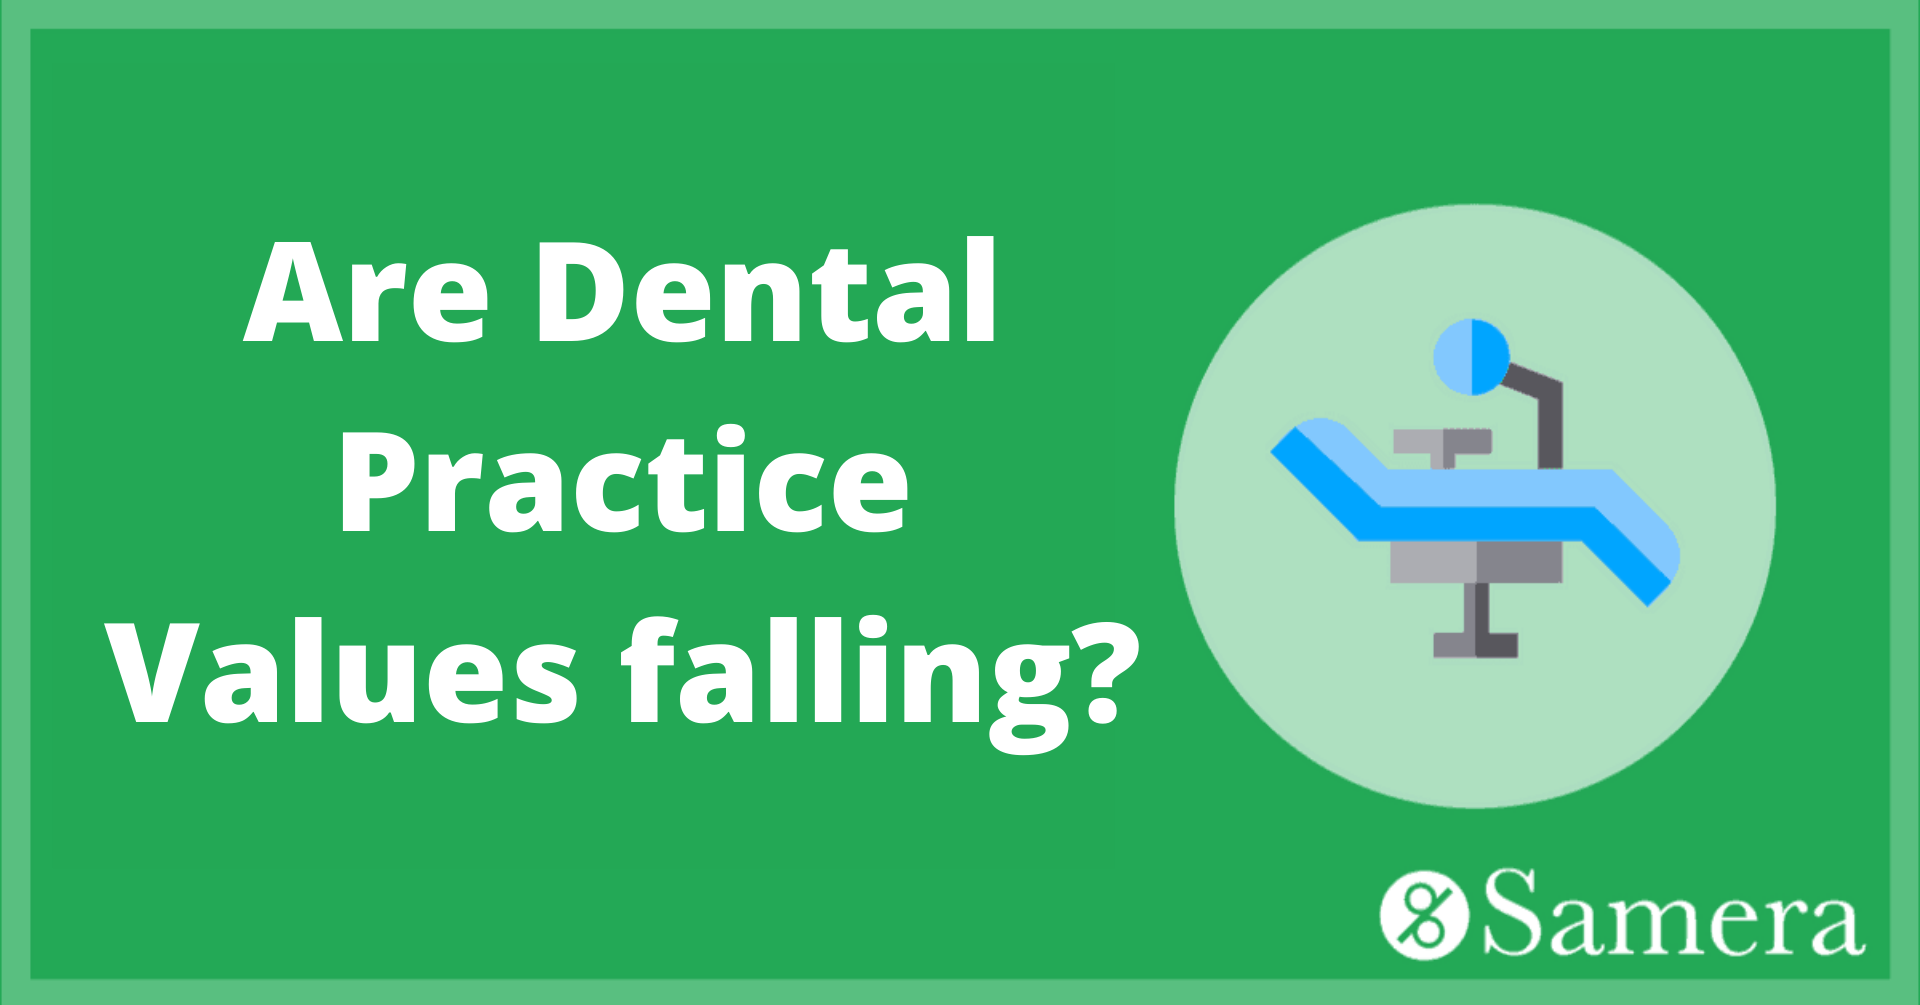 Are Dental Practice Values falling?